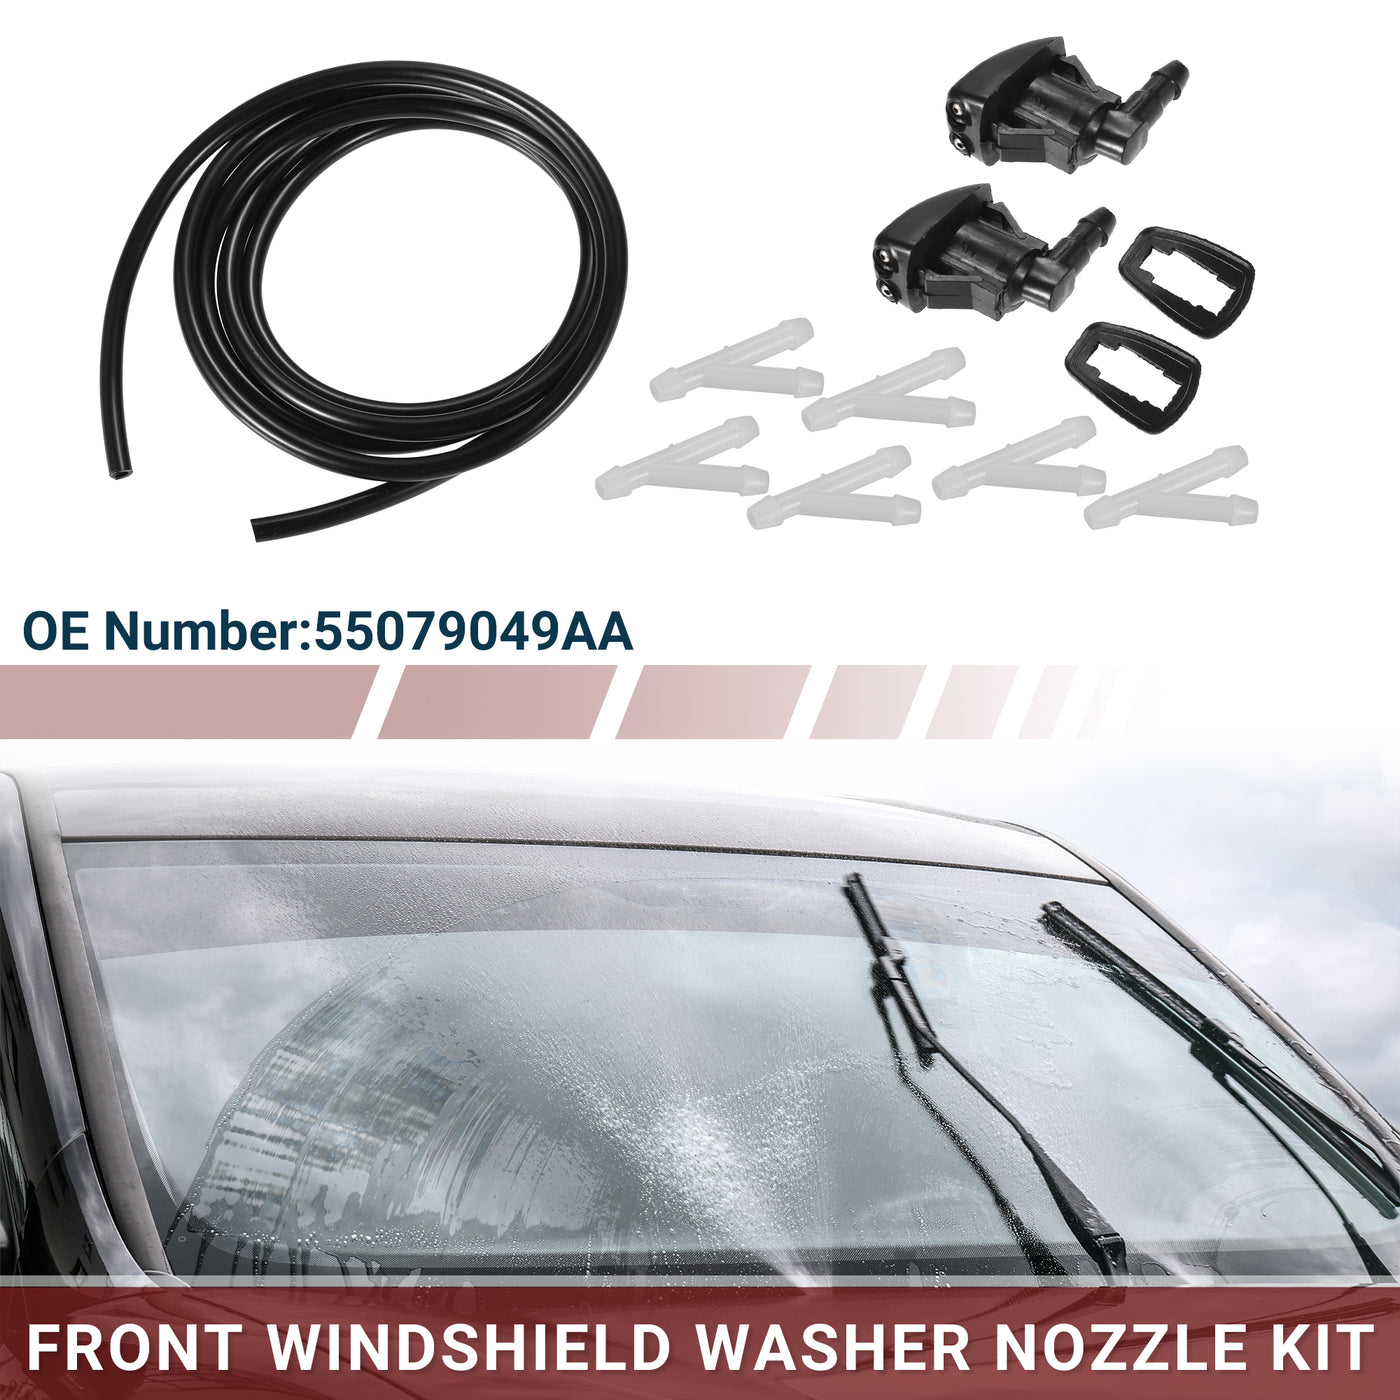 F FIERCE CYCLE Windshield Washer Nozzle for Pontiac G6 Durable No.55079049AA Windscreen Washer Sprayer Nozzle Black Front with Hose and Connectors 1 Set